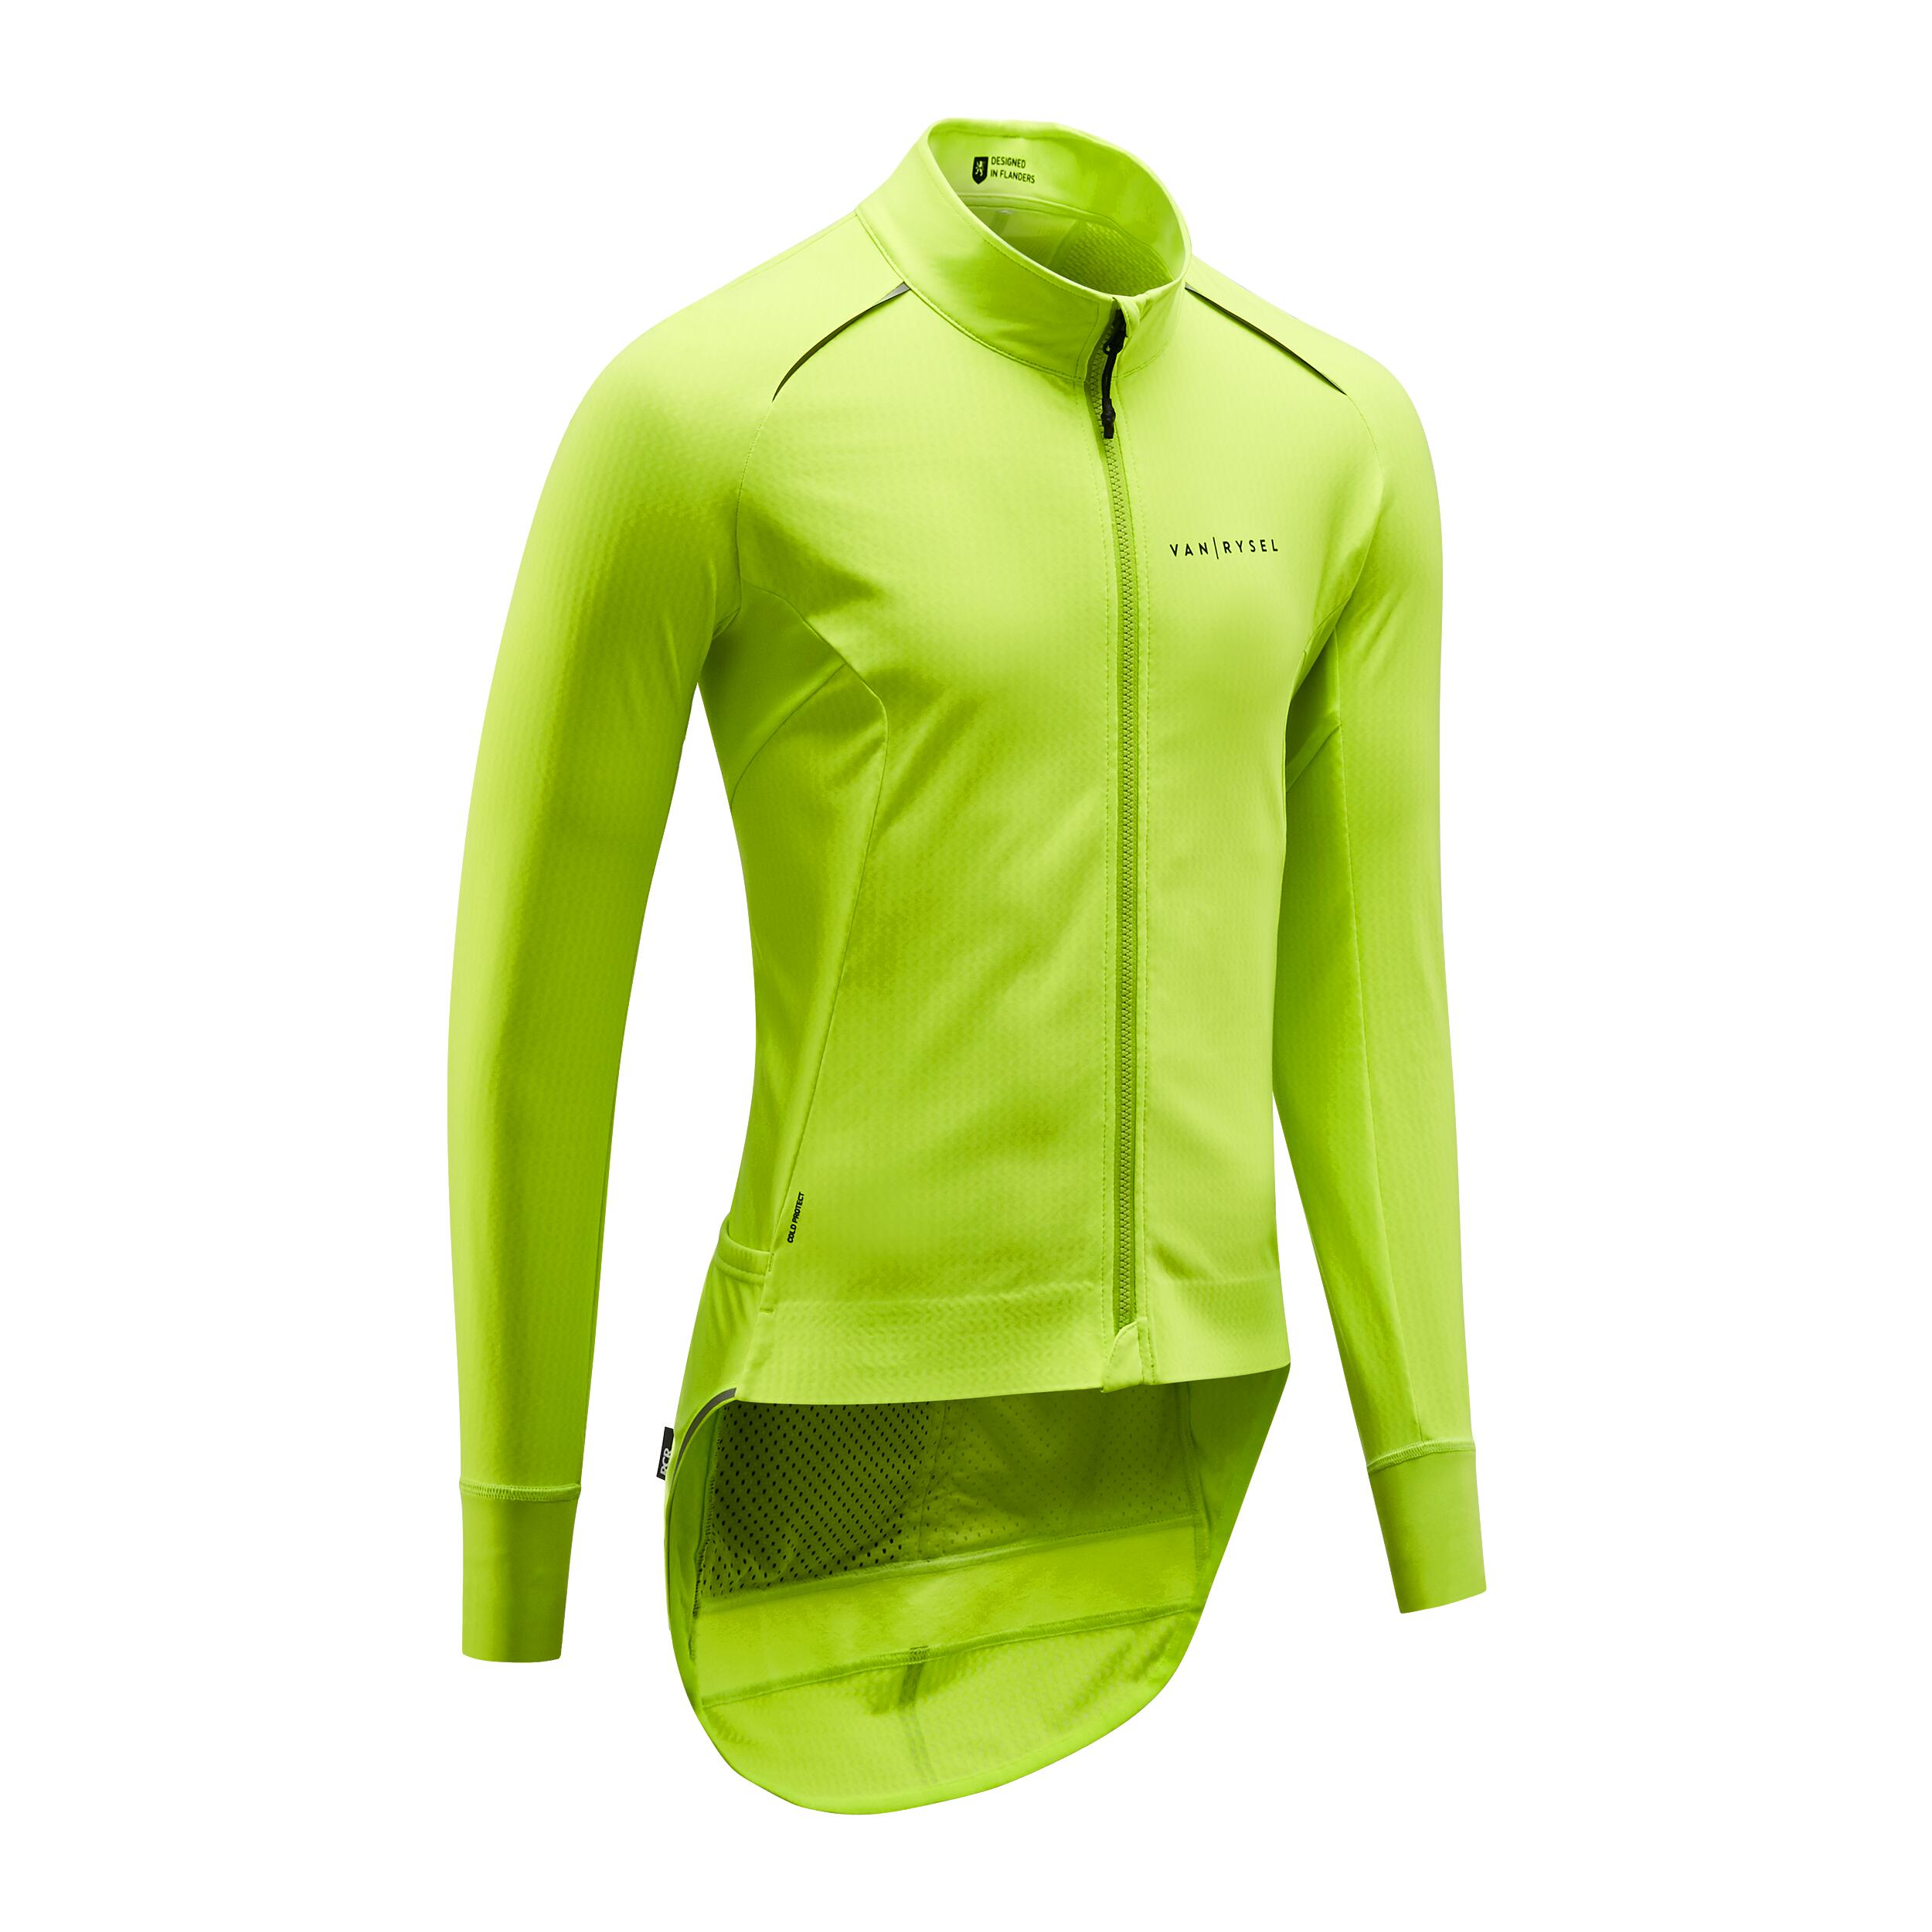 Men's Long-Sleeved Road Cycling Winter Jacket Racer - Yellow 1/9